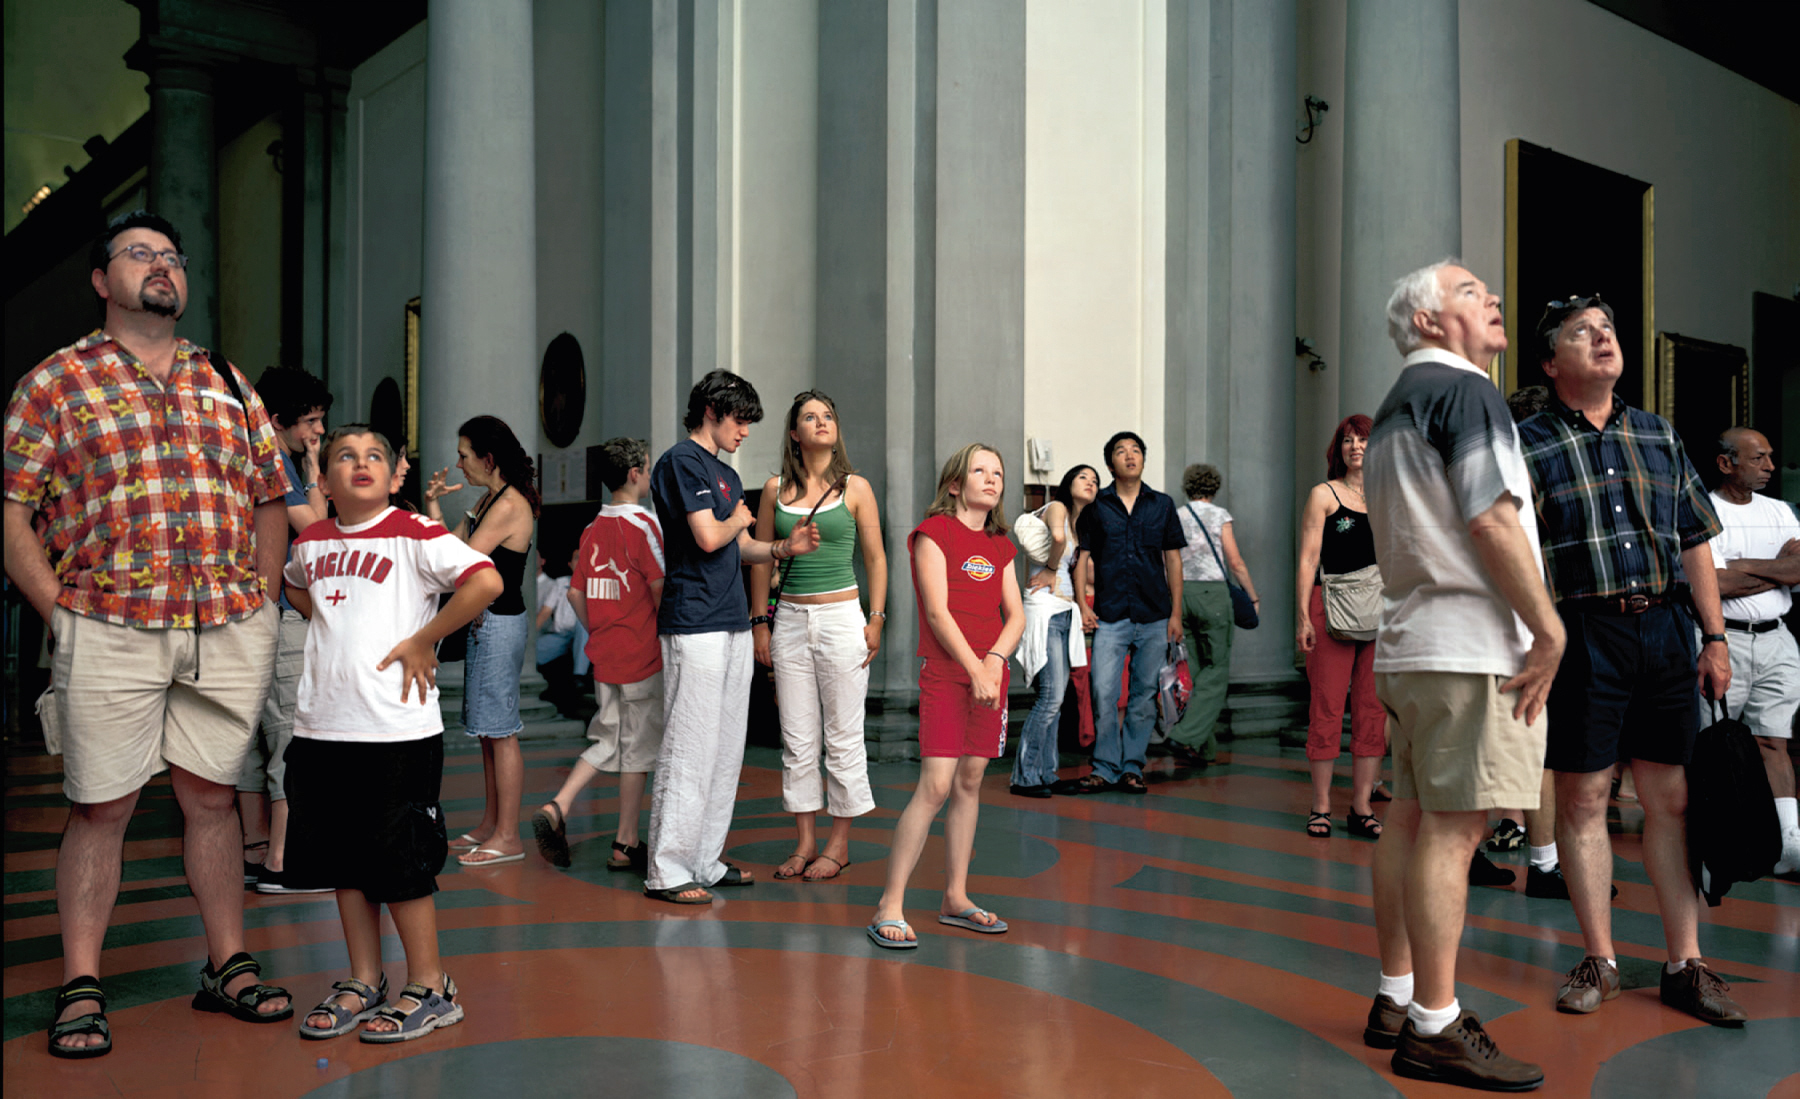 Thomas Struth, Audience 10 (Galleria dell'Accademia), Florenz, 2004, mumok - Museum moderner Kunst Stiftung Ludwig Wien, acquired with support of mumok Board 2006 © Thomas Struth